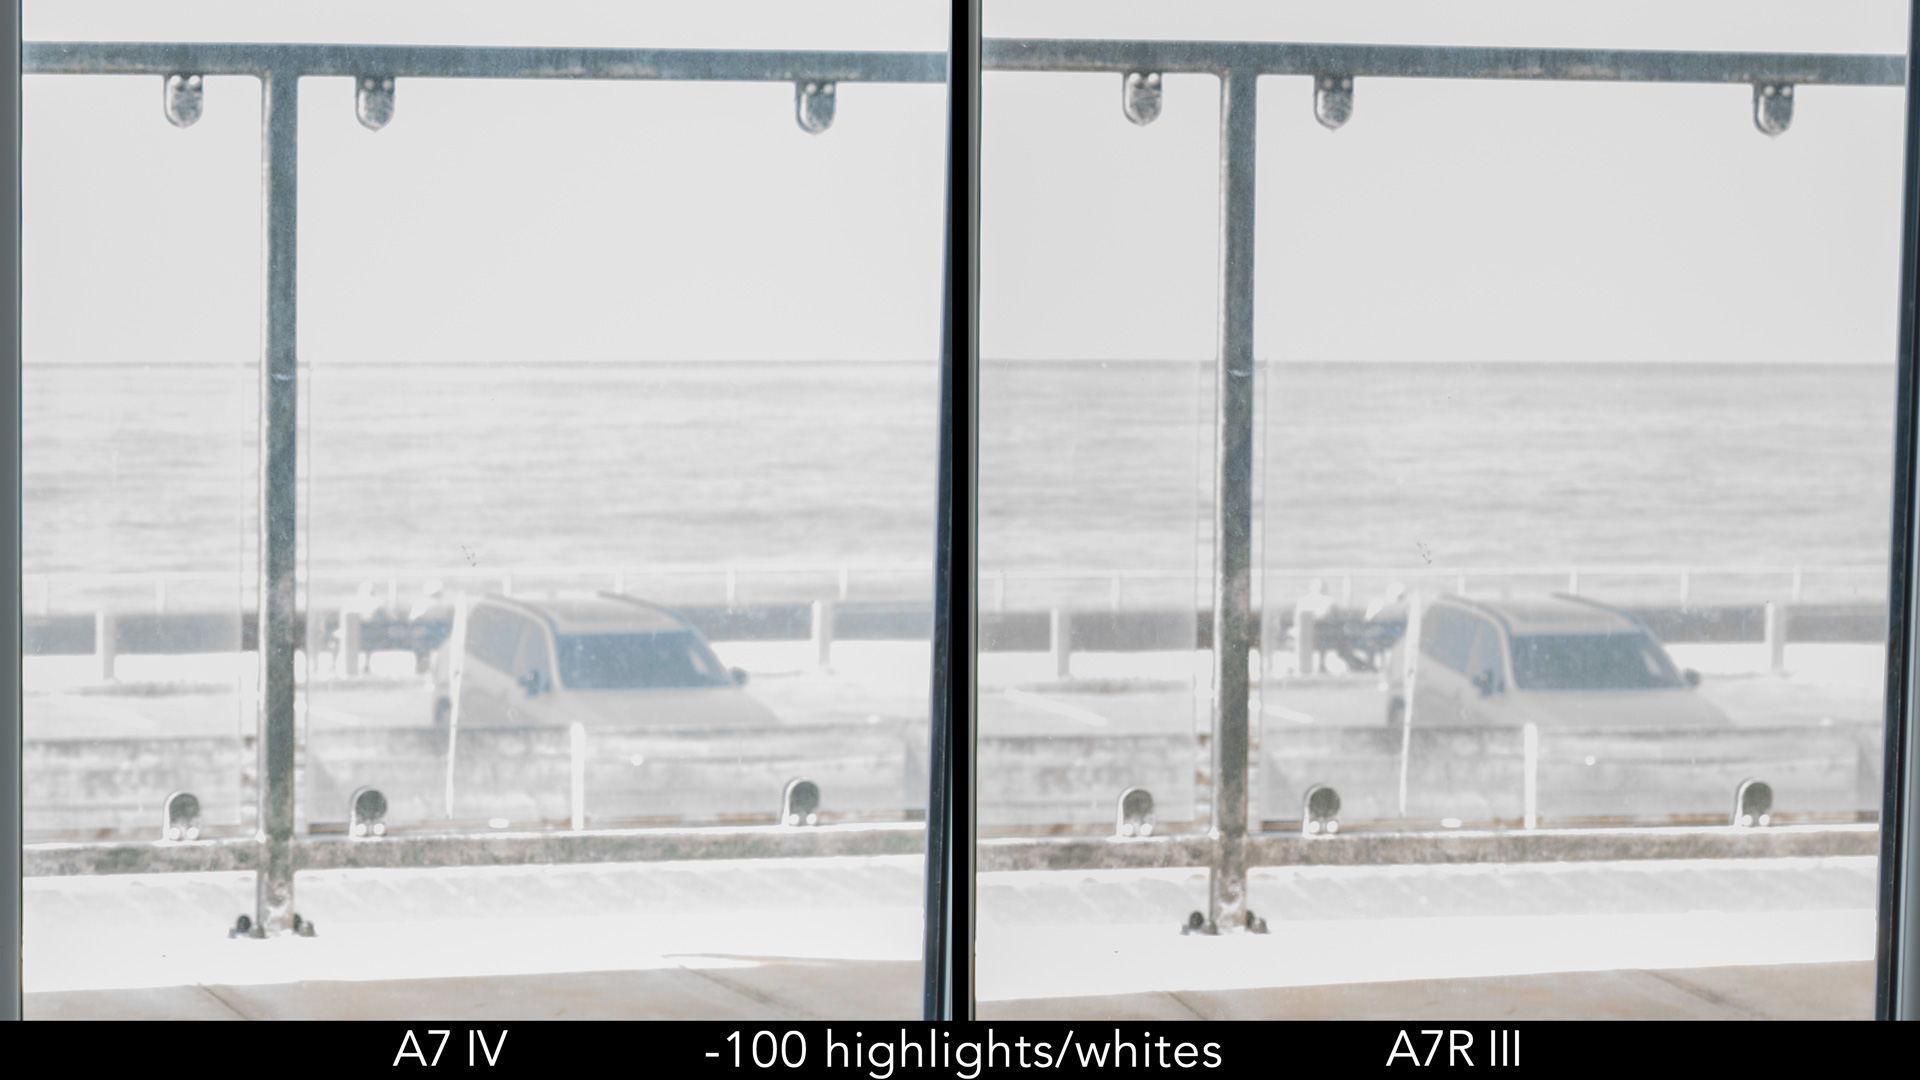 Side by side crop showing highlights recovery for the A7 IV and A7R III